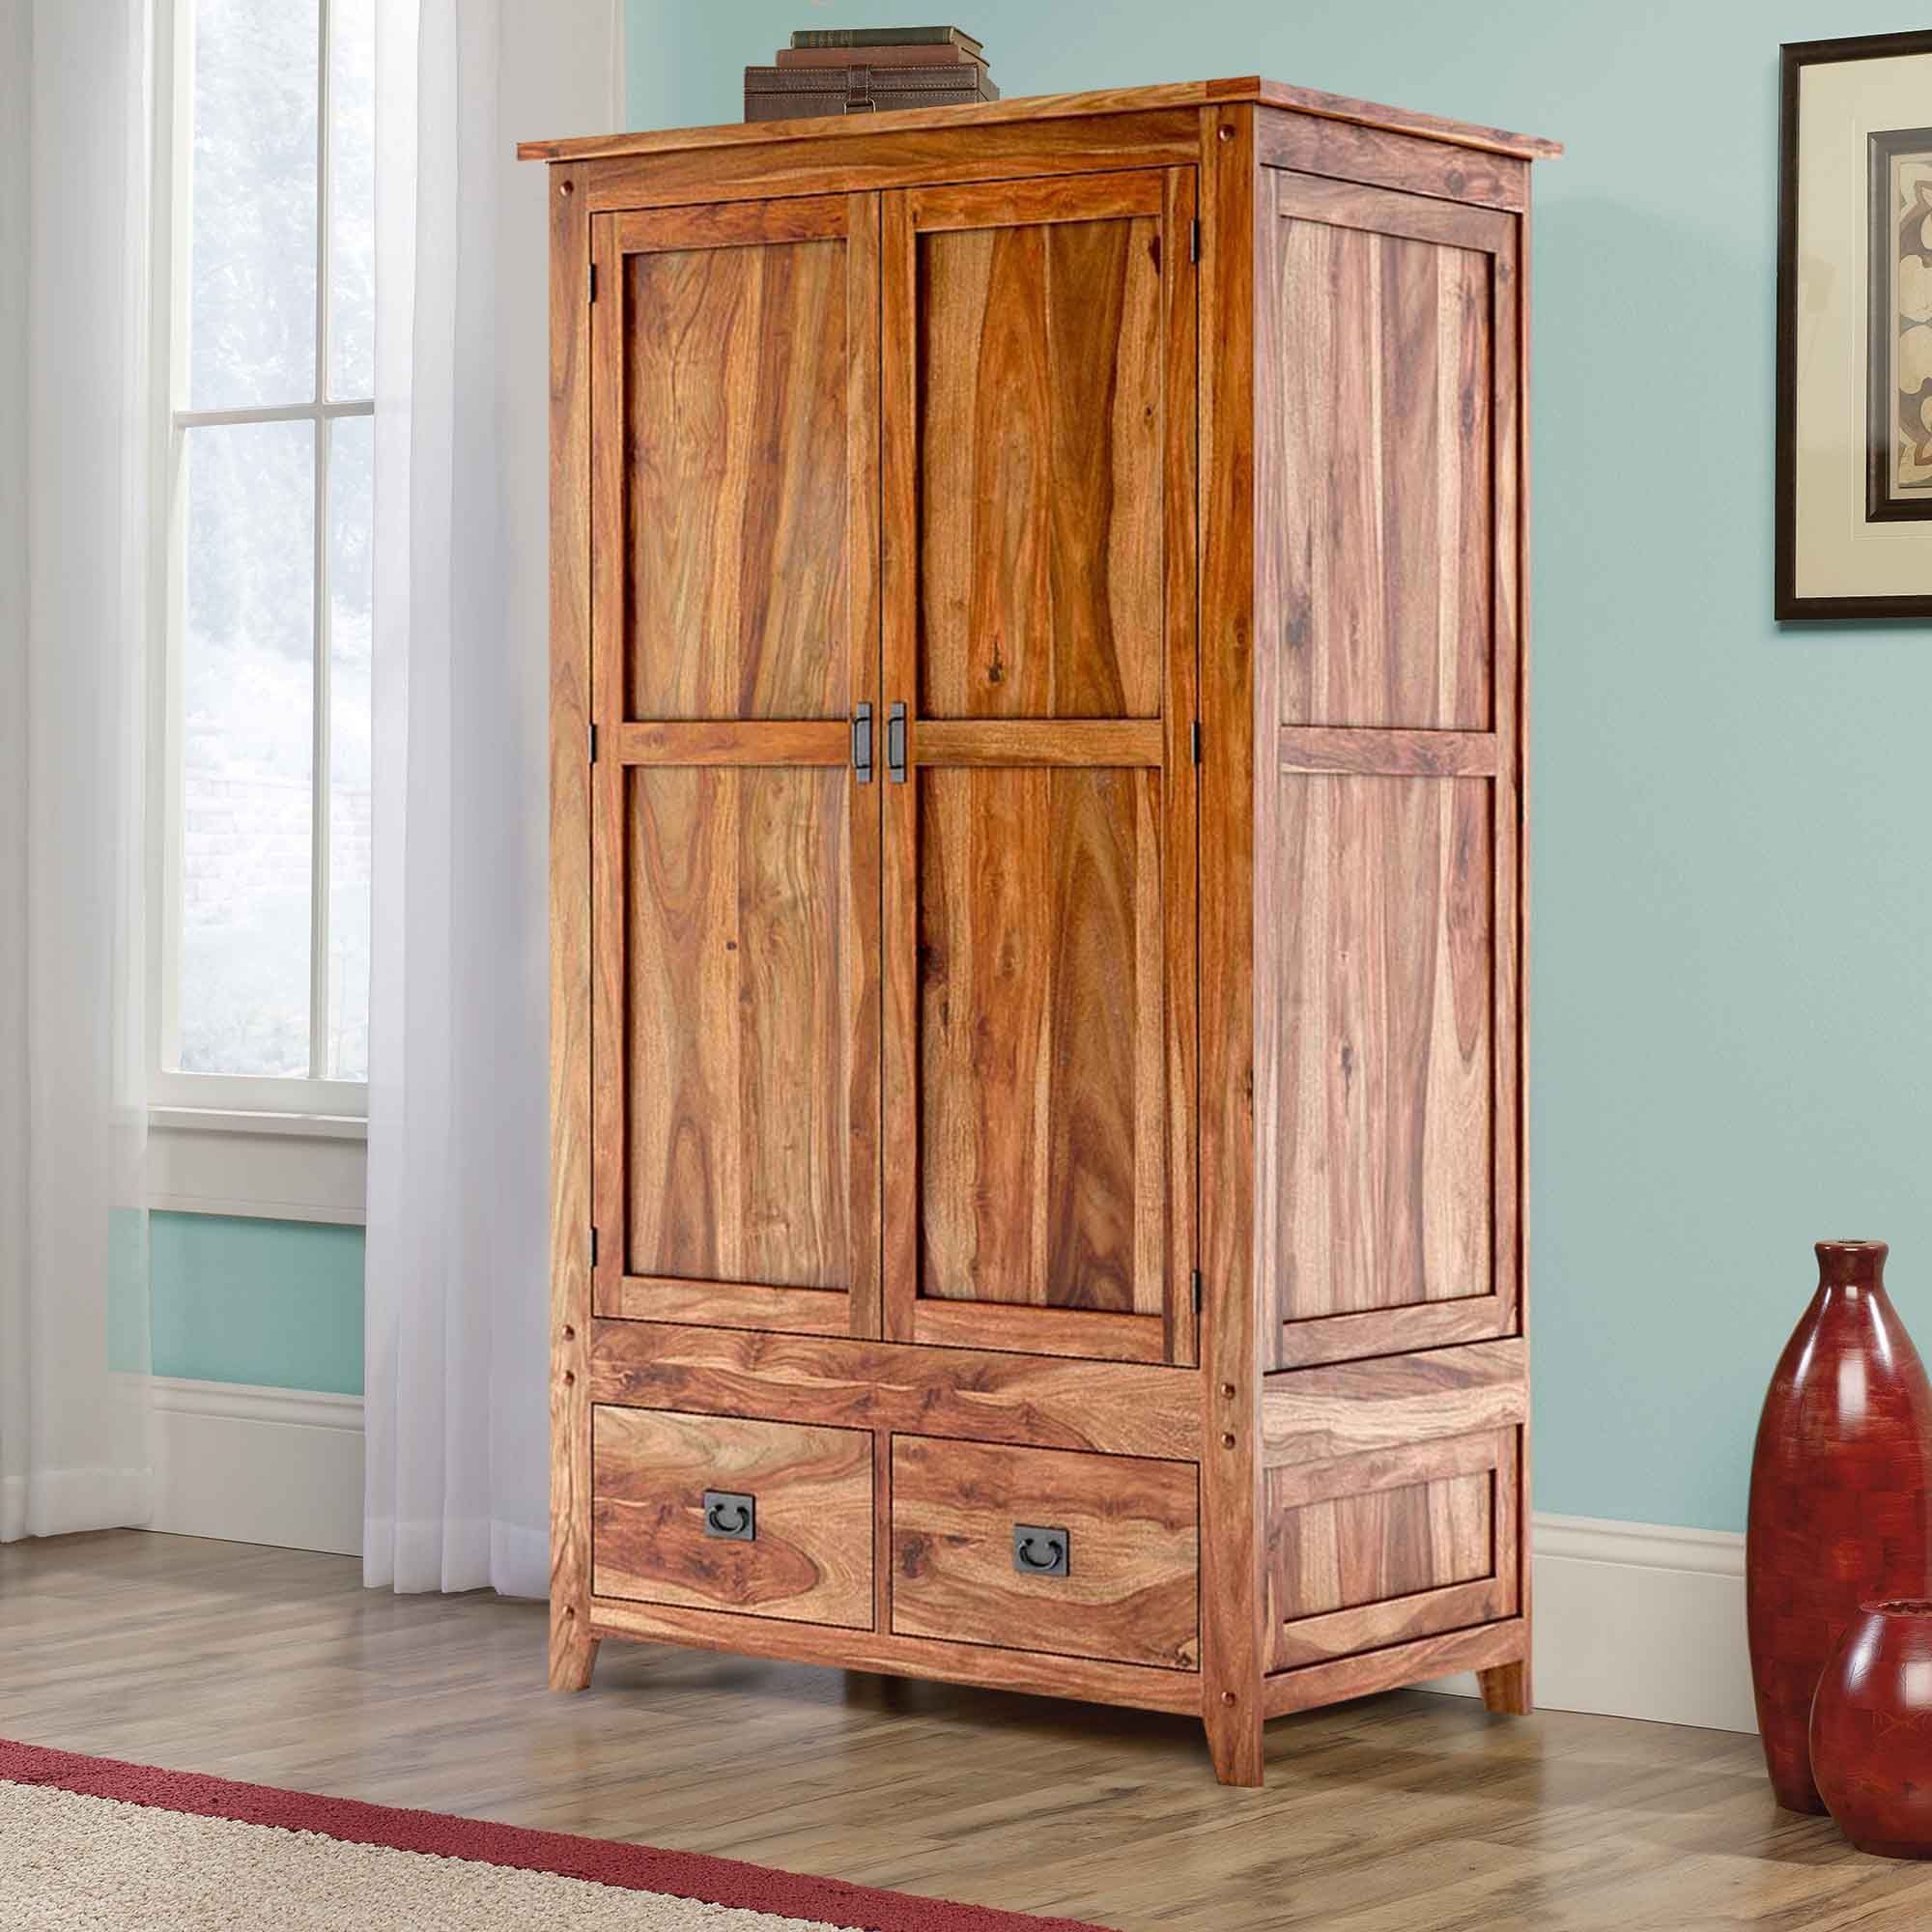 Delaware Farmhouse Solid Wood Wardrobe Armoire With Drawers Regarding Wardrobes And Armoires (View 15 of 15)